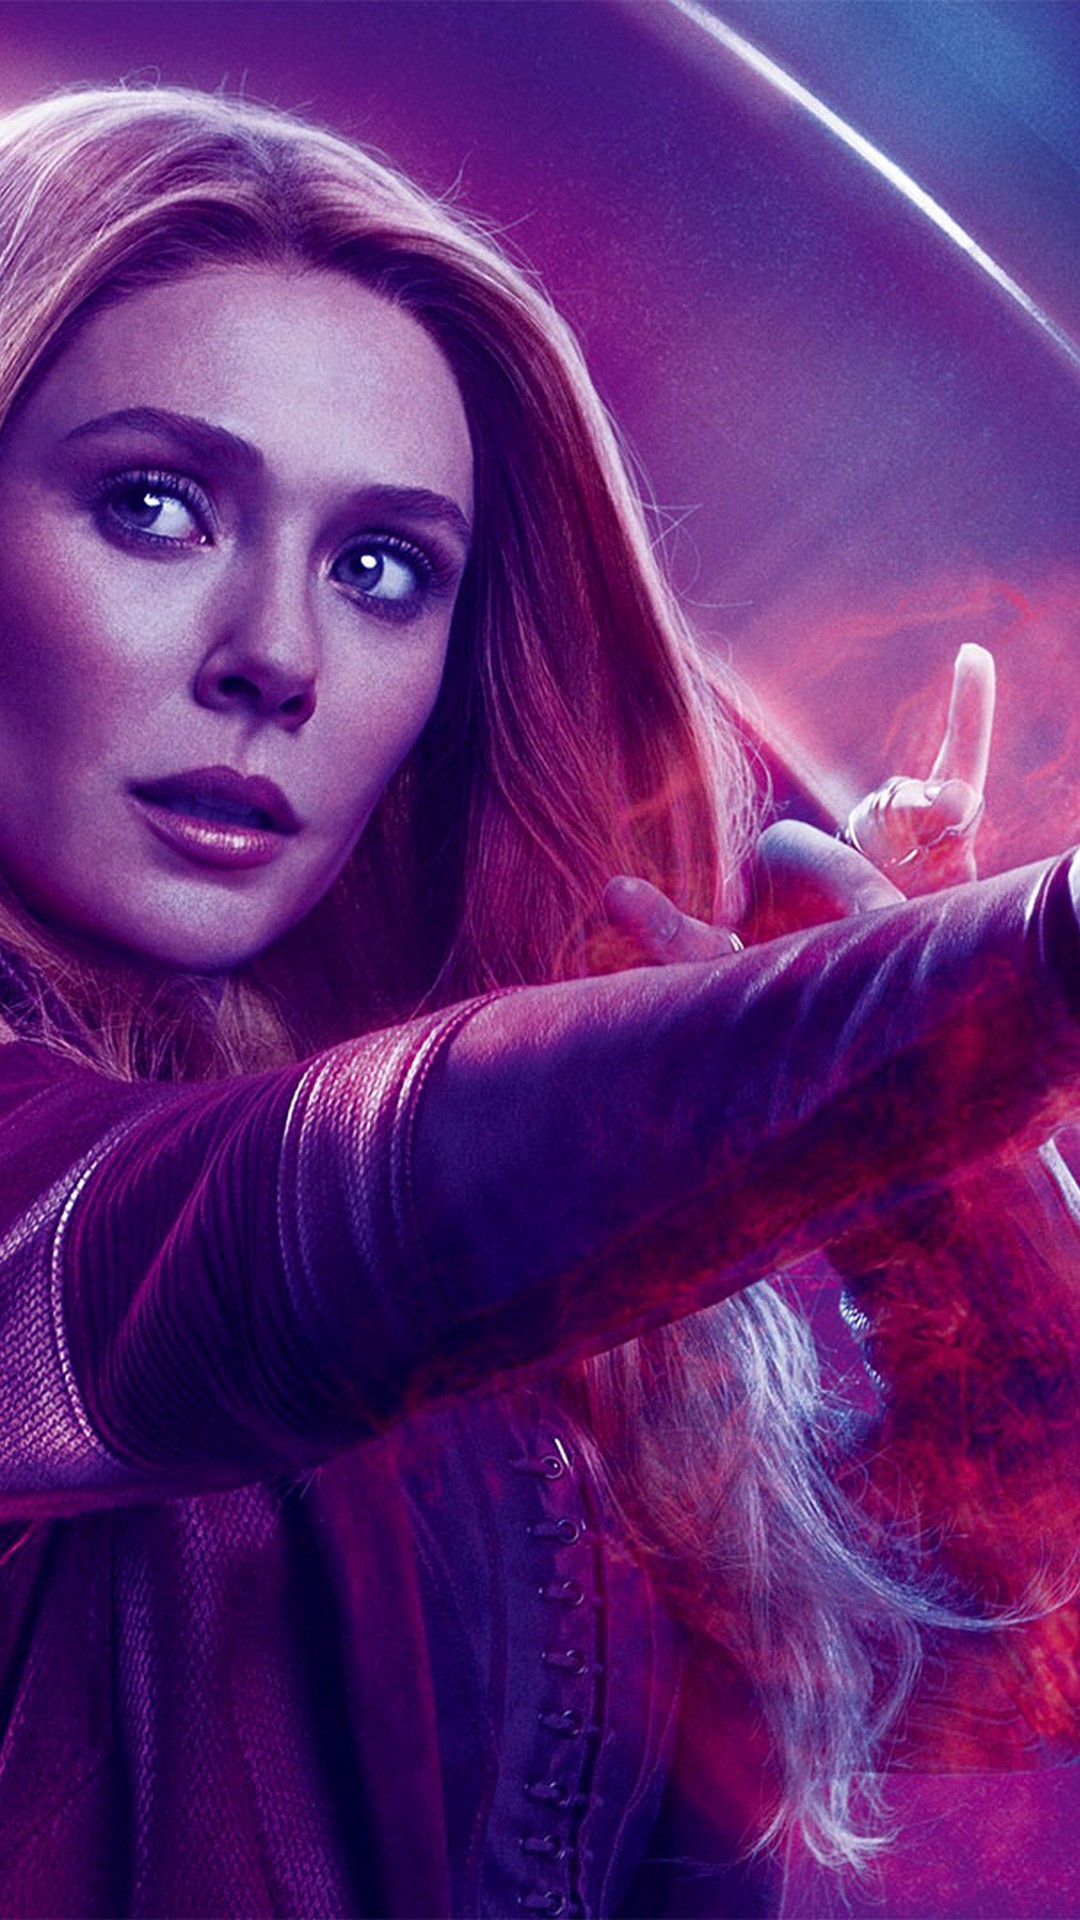 Scarlet Witch Avengers Endgame iPhone Wallpaper with high-resolution 1080x1920 pixel. You can use this poster wallpaper for your Desktop Computers, Mac Screensavers, Windows Backgrounds, iPhone Wallpapers, Tablet or Android Lock screen and another Mobile device